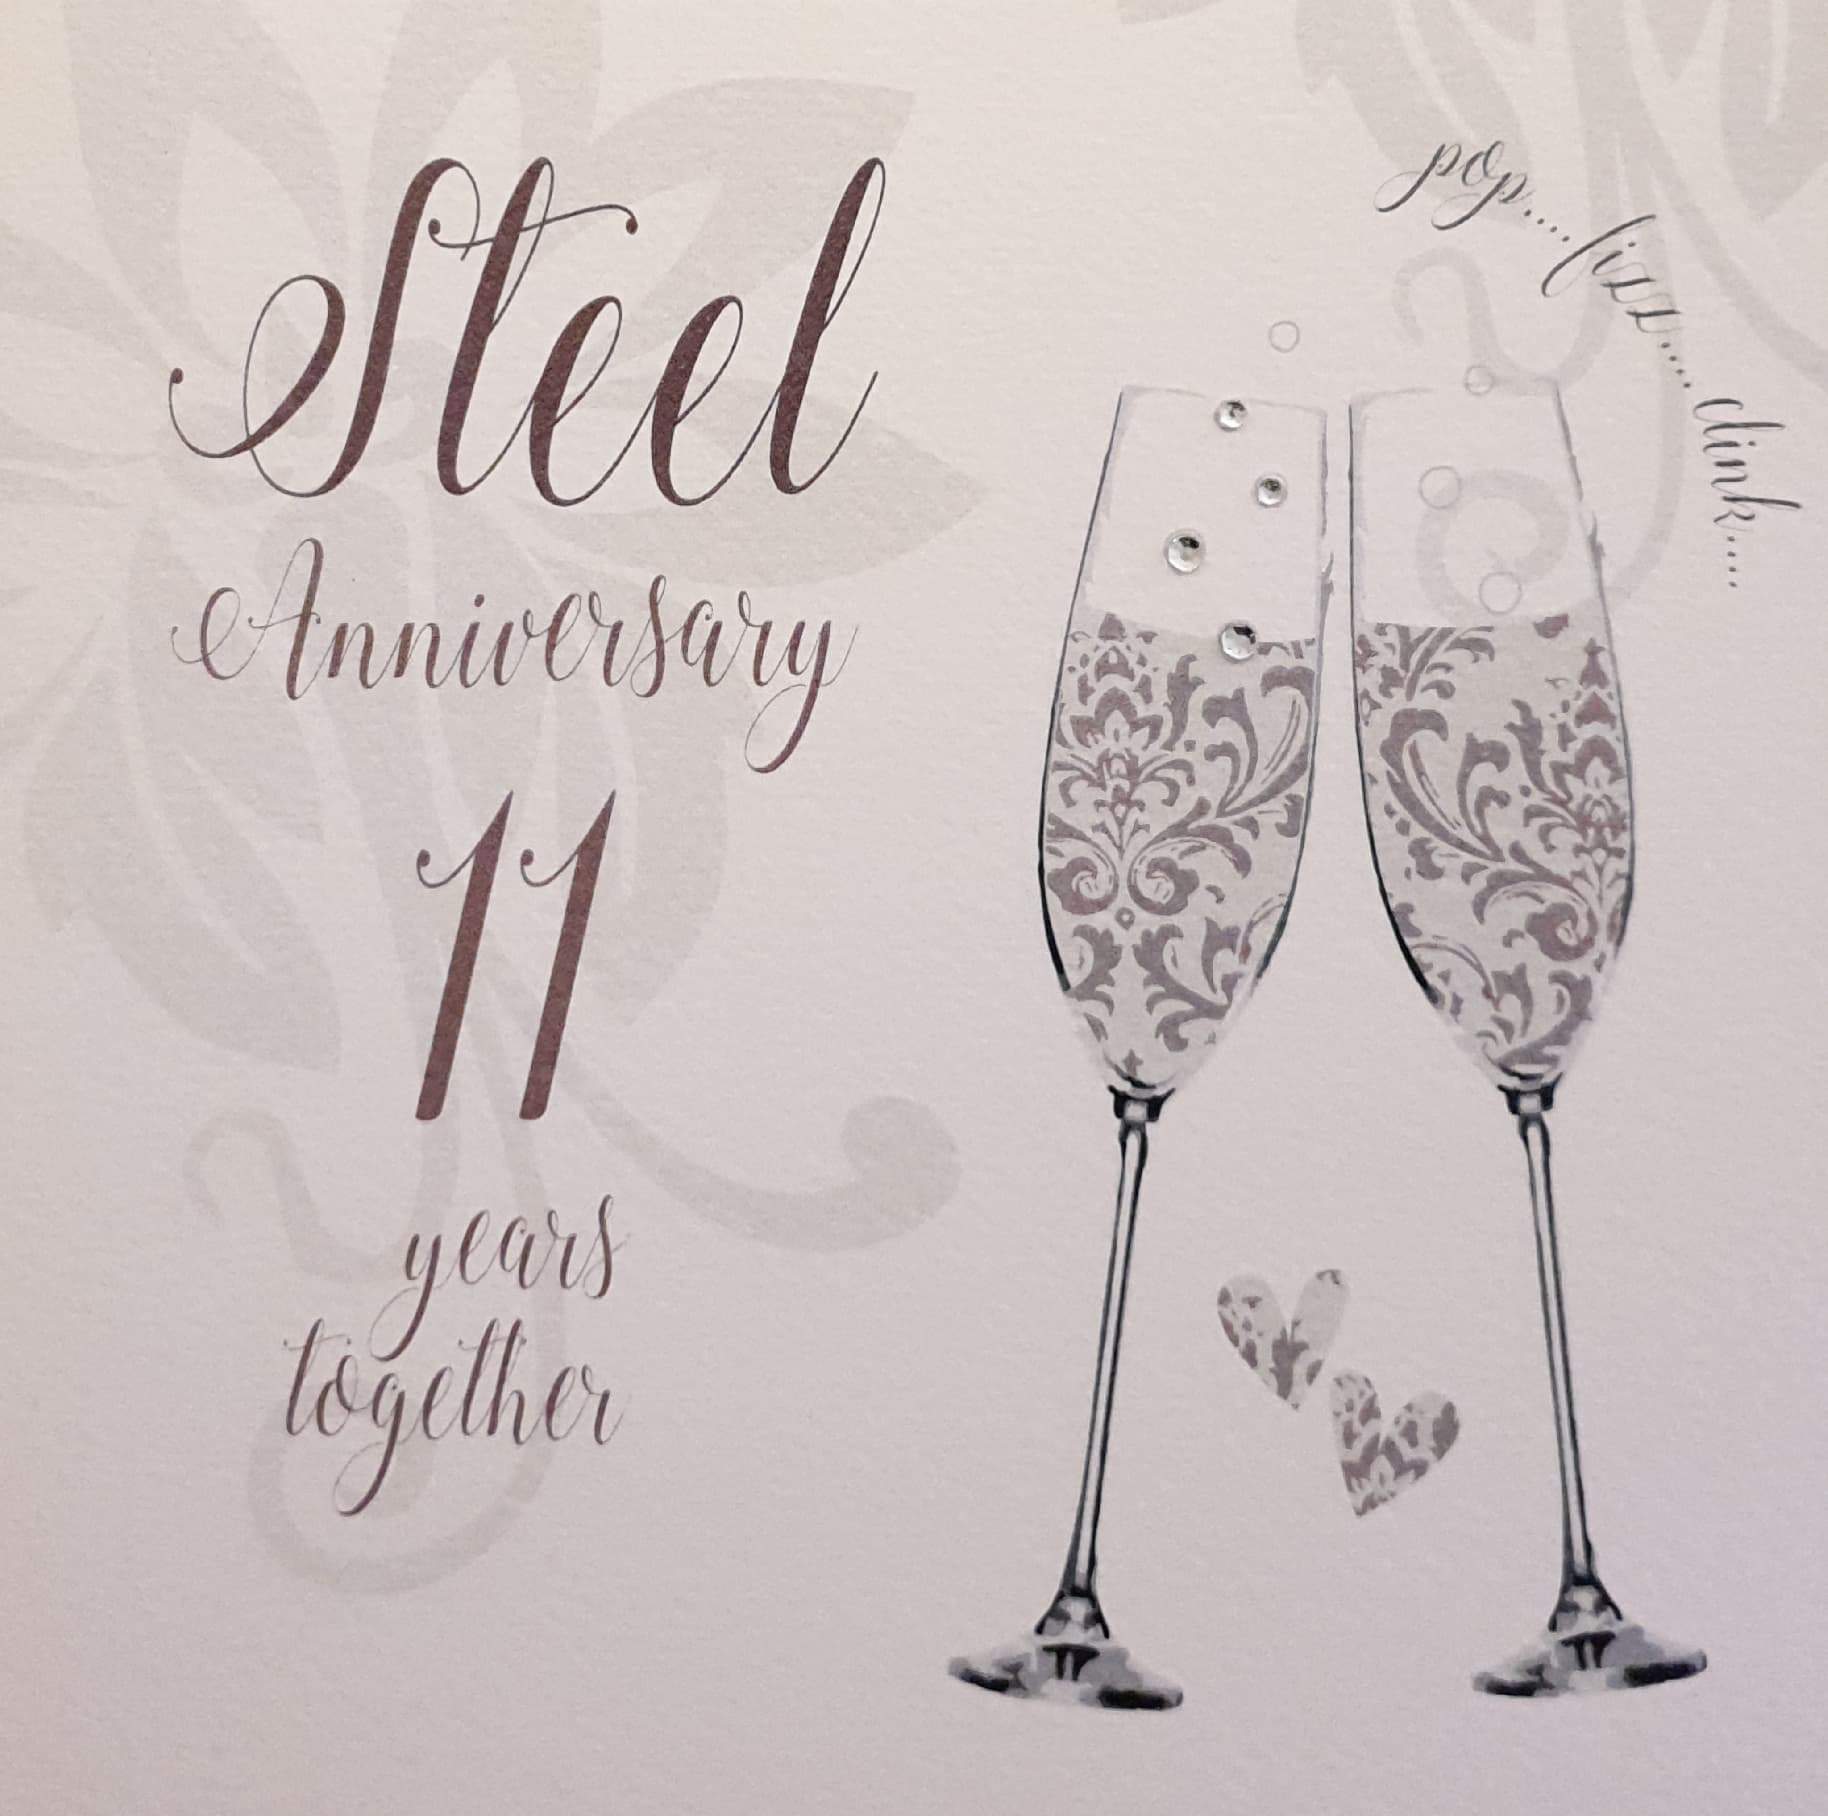 Anniversary Card - Steel Anniversary - 11 Years Together / Two Champagne Glasses with Silver Design